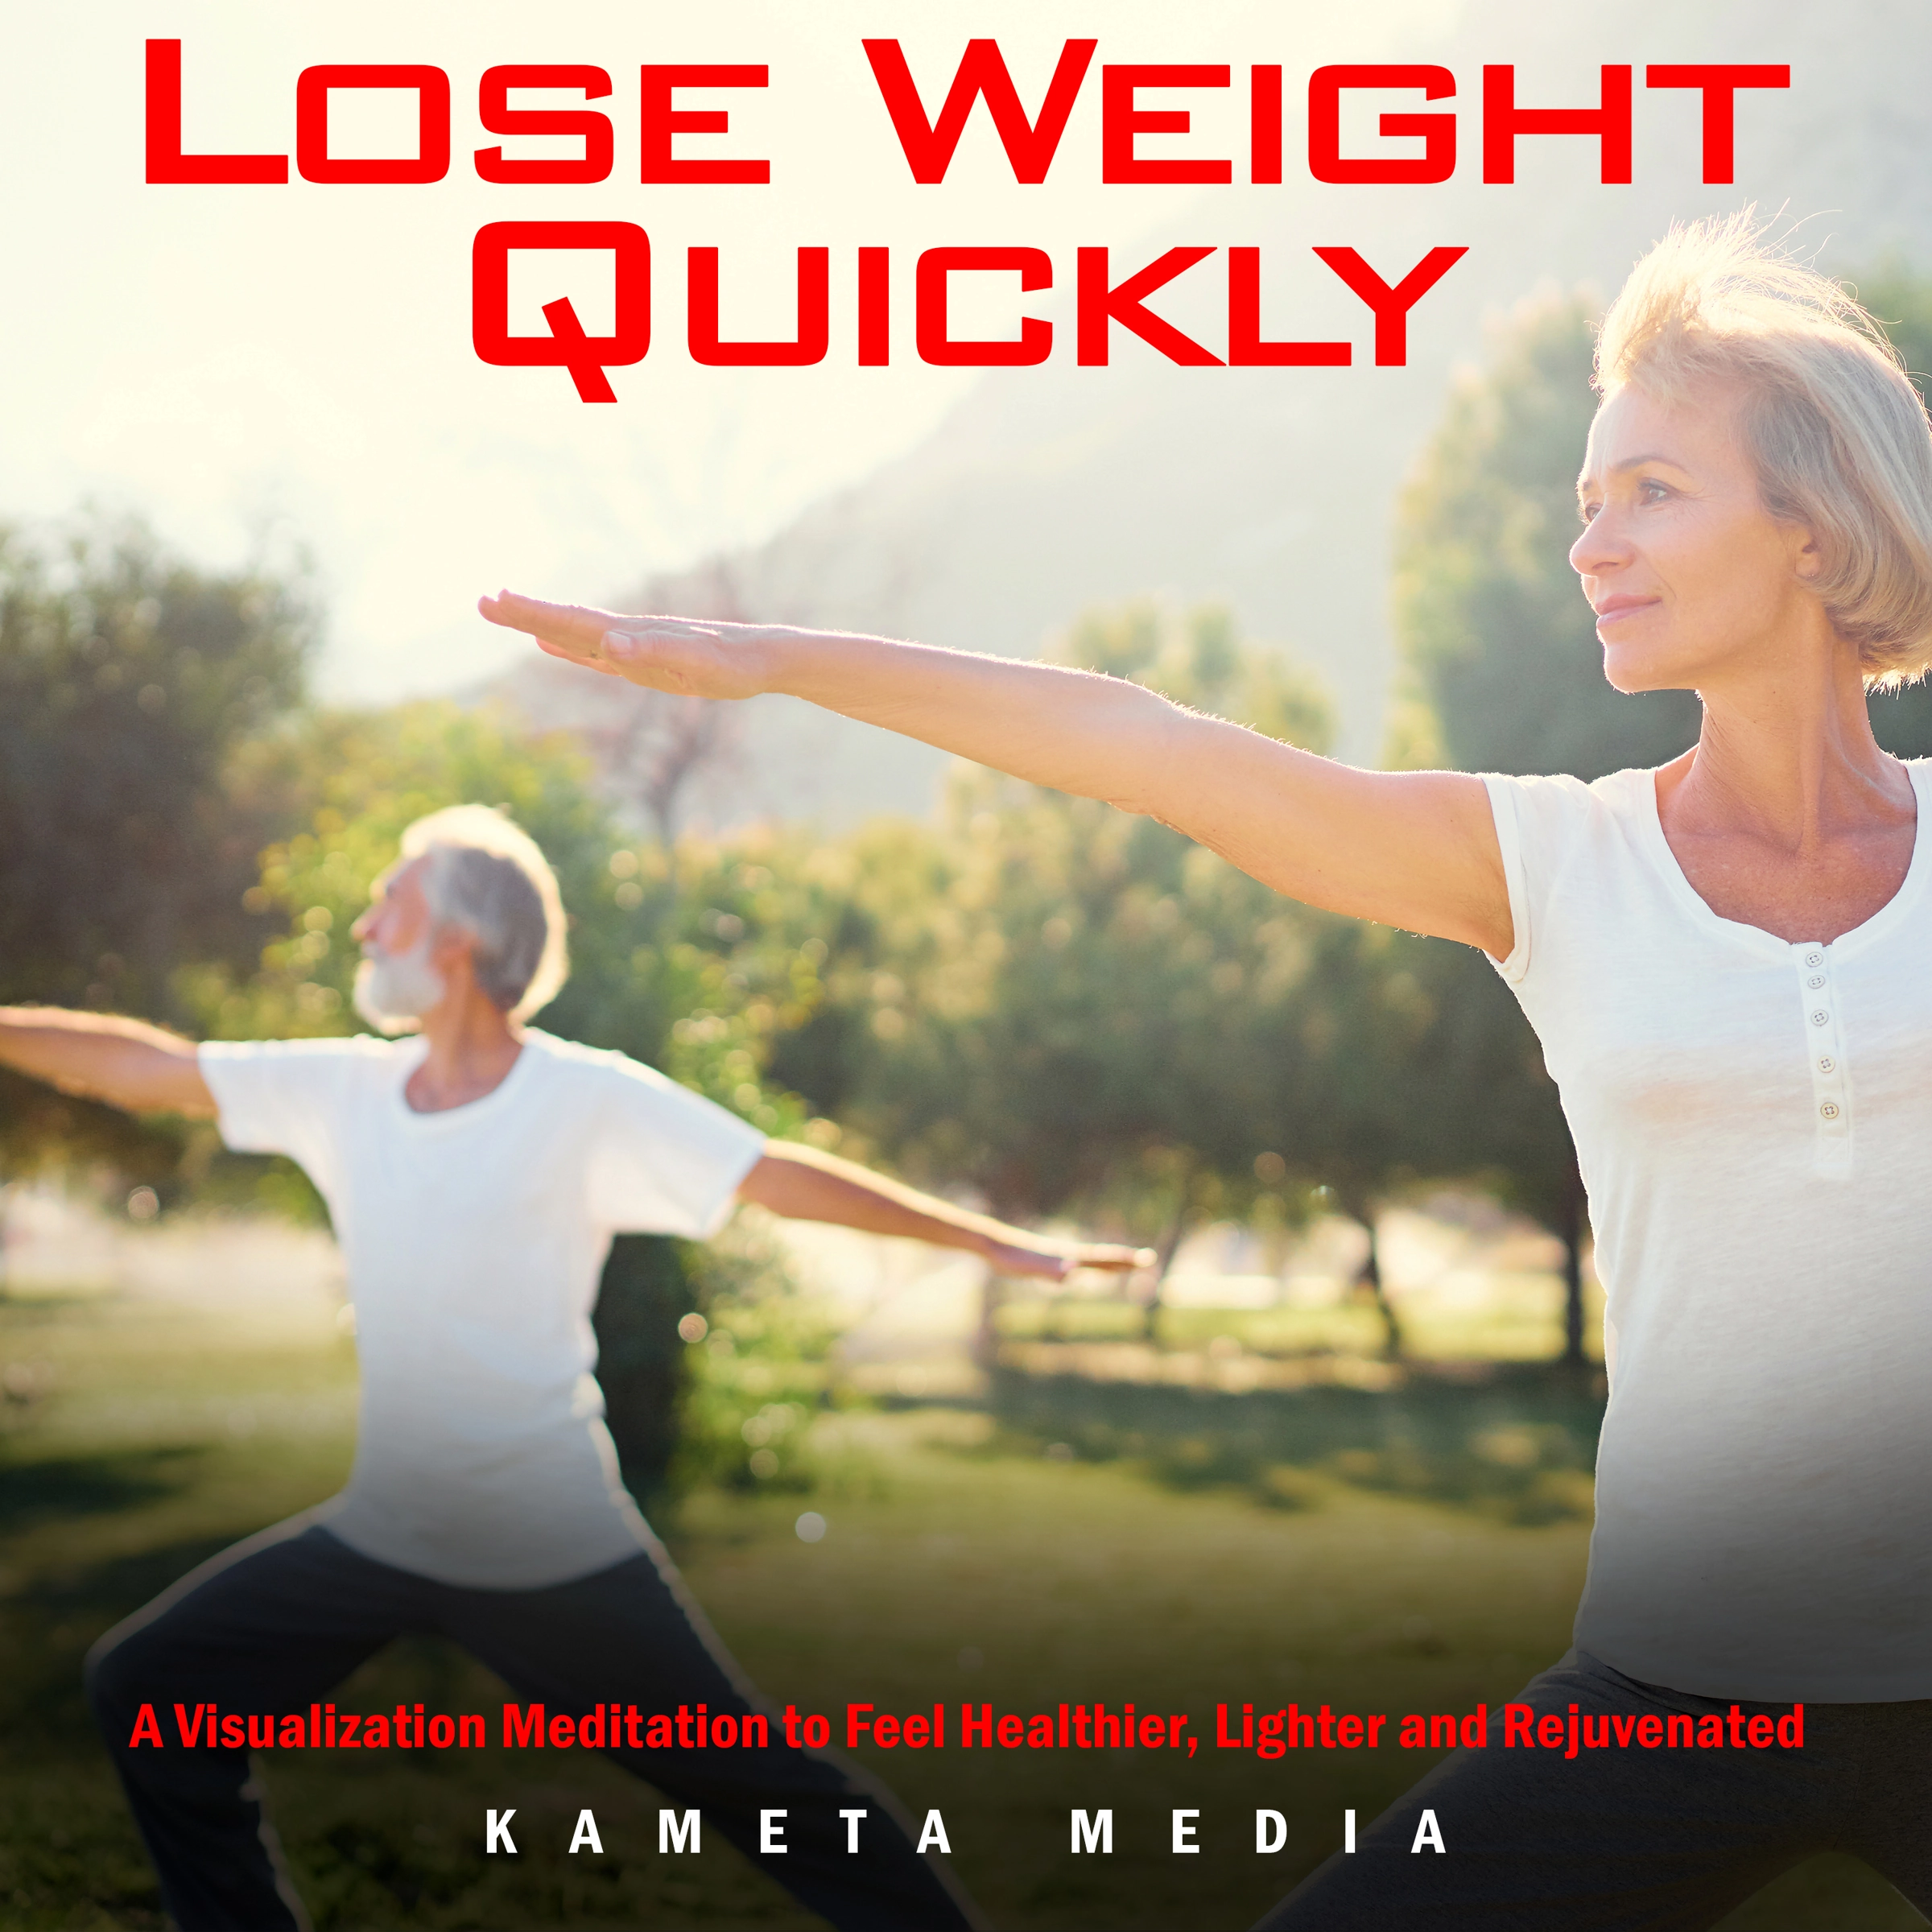 Lose Weight Quickly: A Visualization Meditation to Feel Healthier, Lighter and Rejuvenated Audiobook by Kameta Media